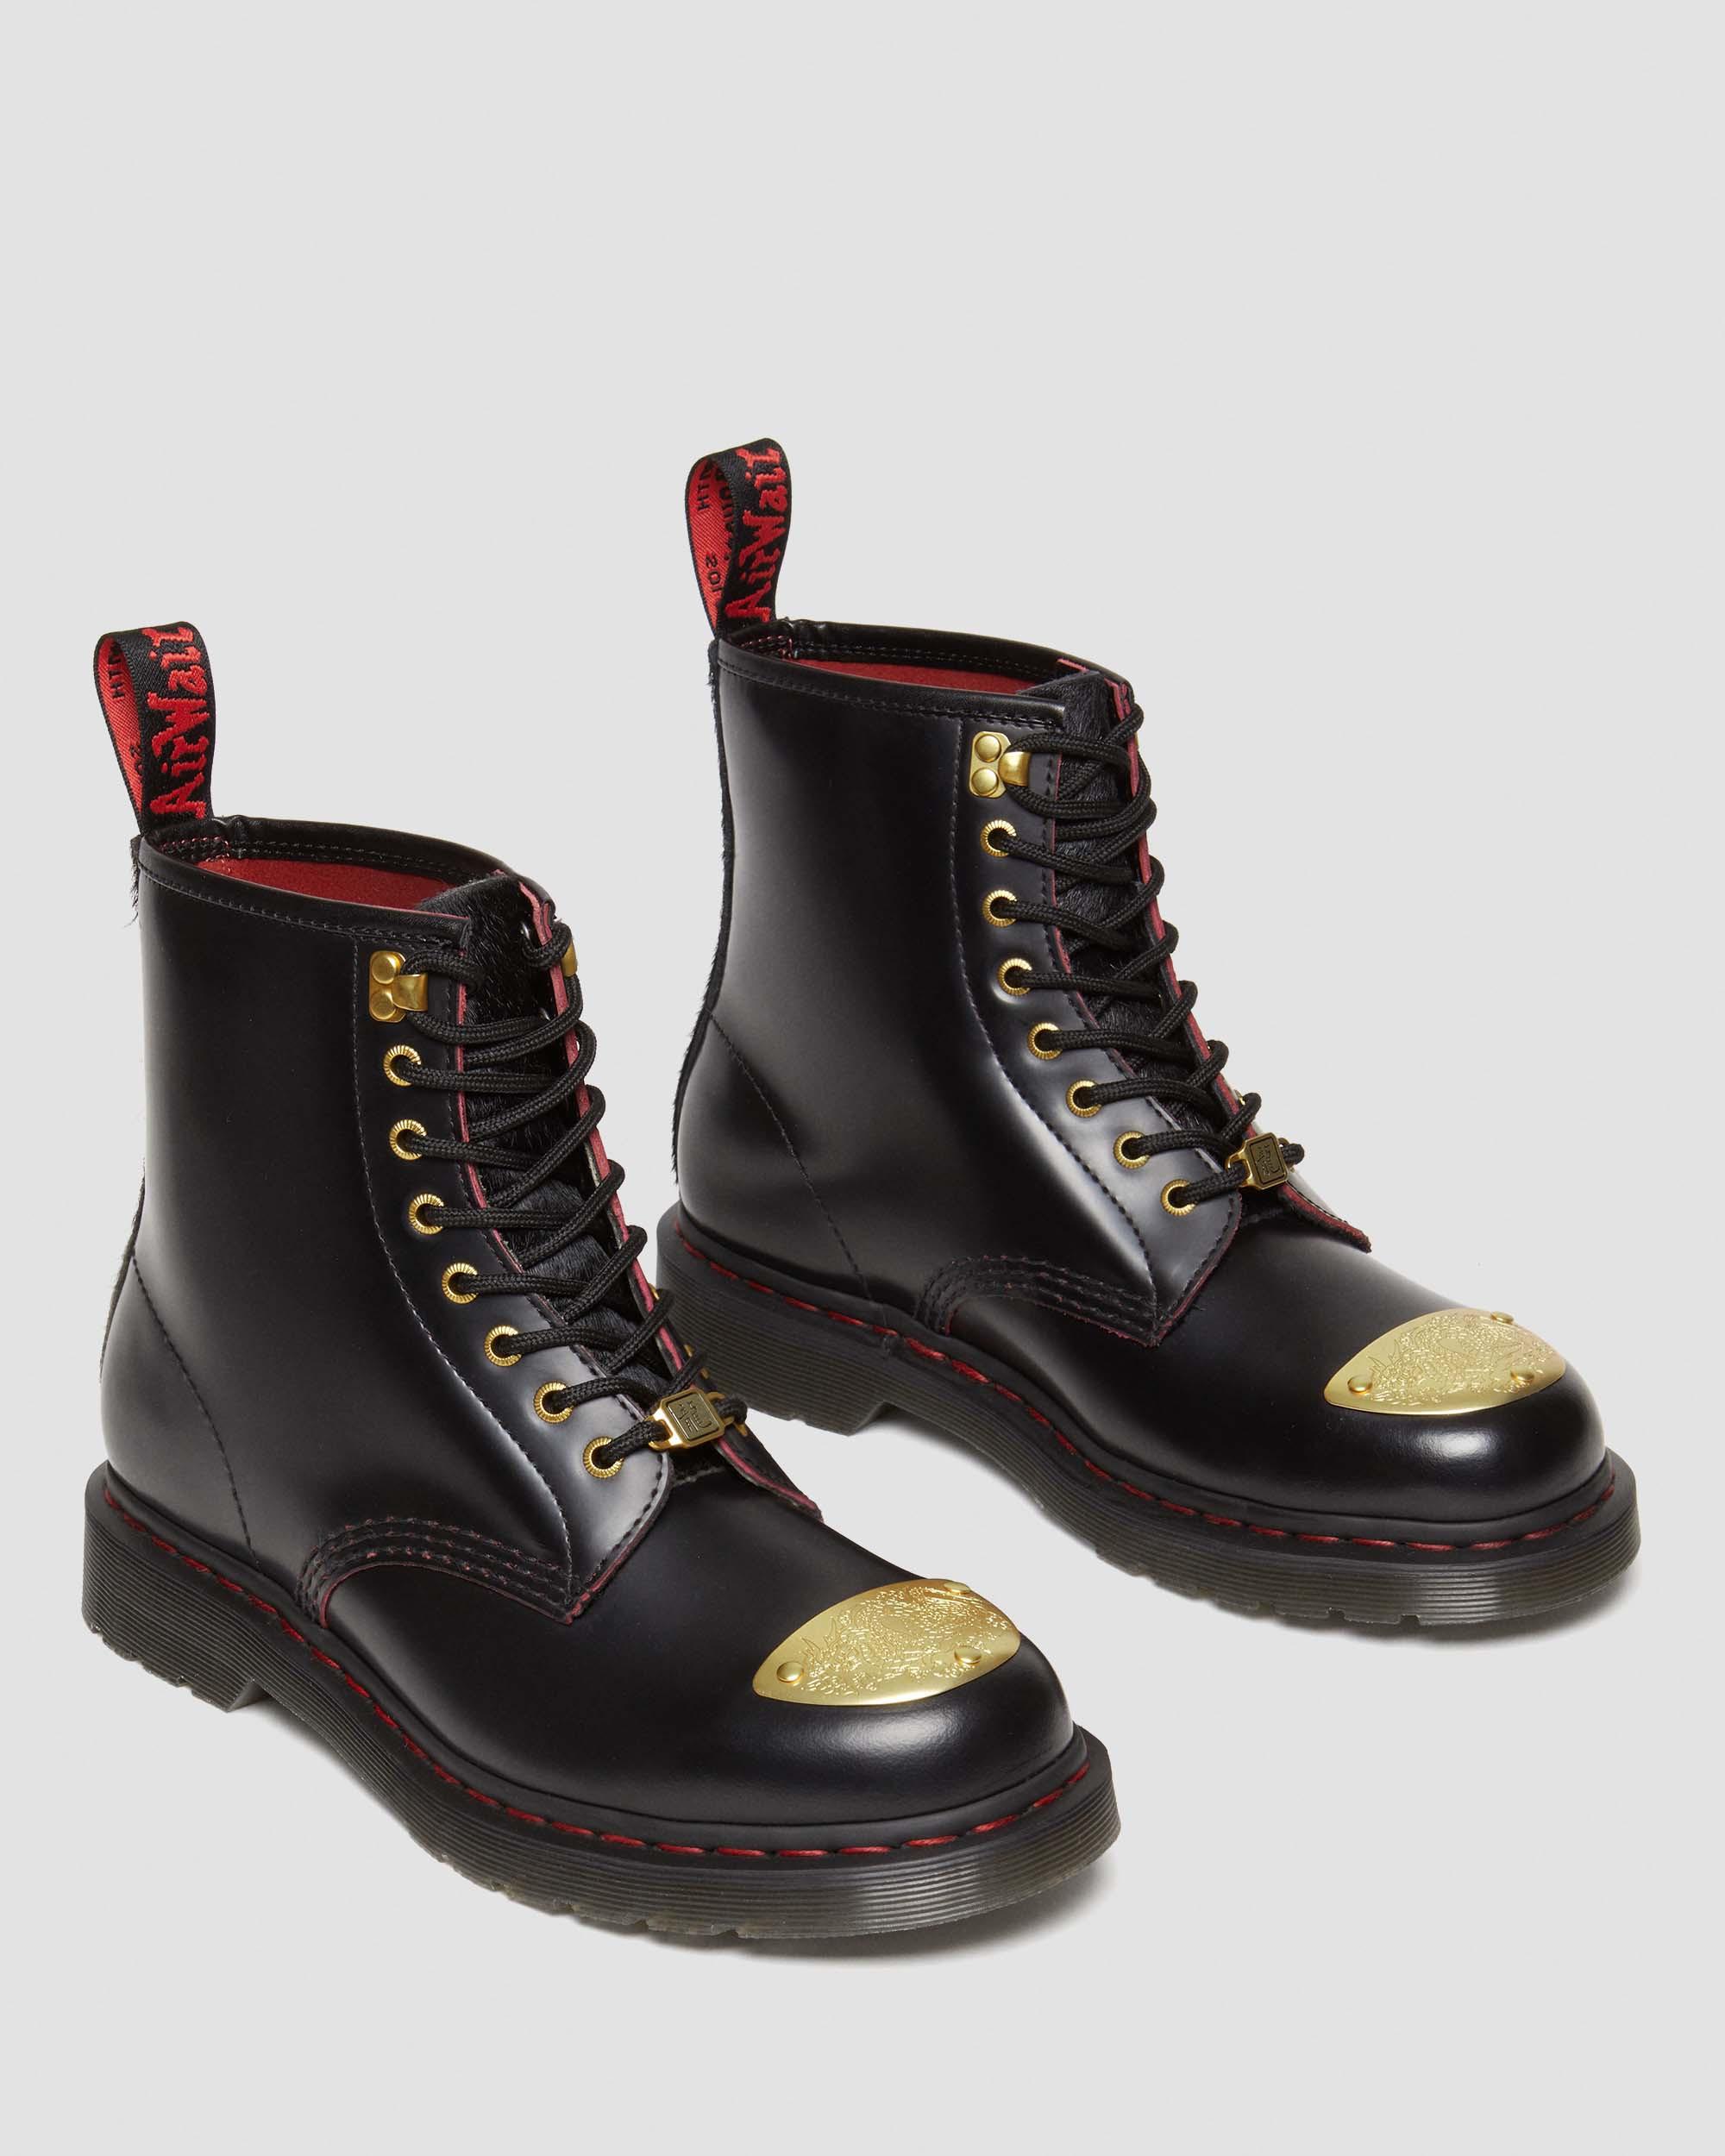 Boots 1460 Year of the Dragon en cuir à lacets in Black+Red+Black